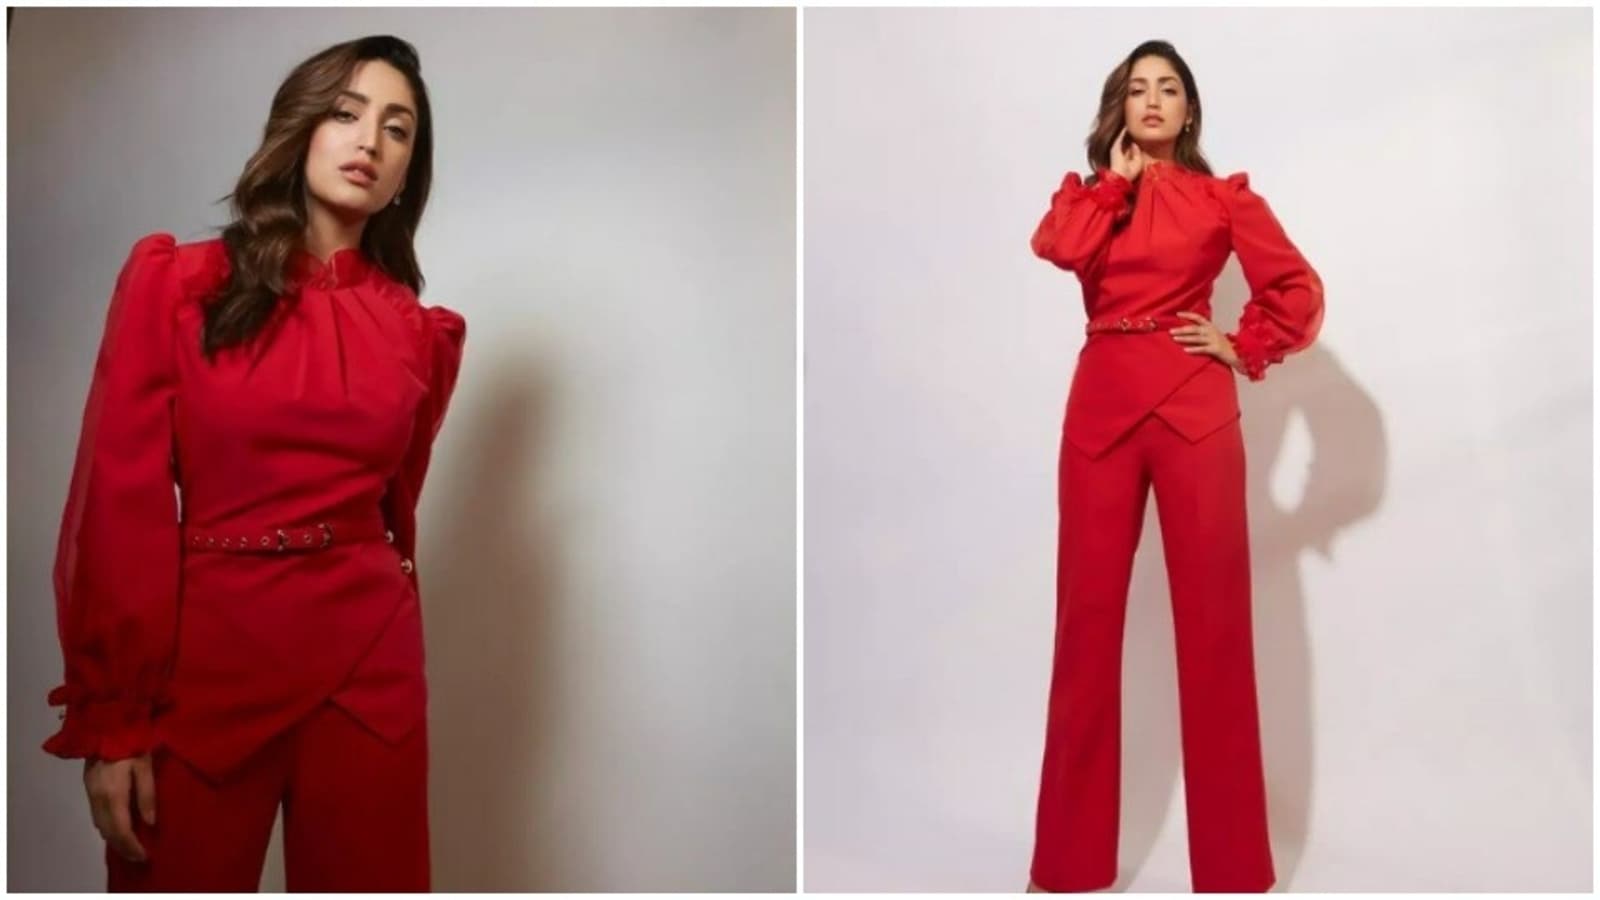 Yami Gautam is here to bless our feed in a red co-ord set | Hindustan Times